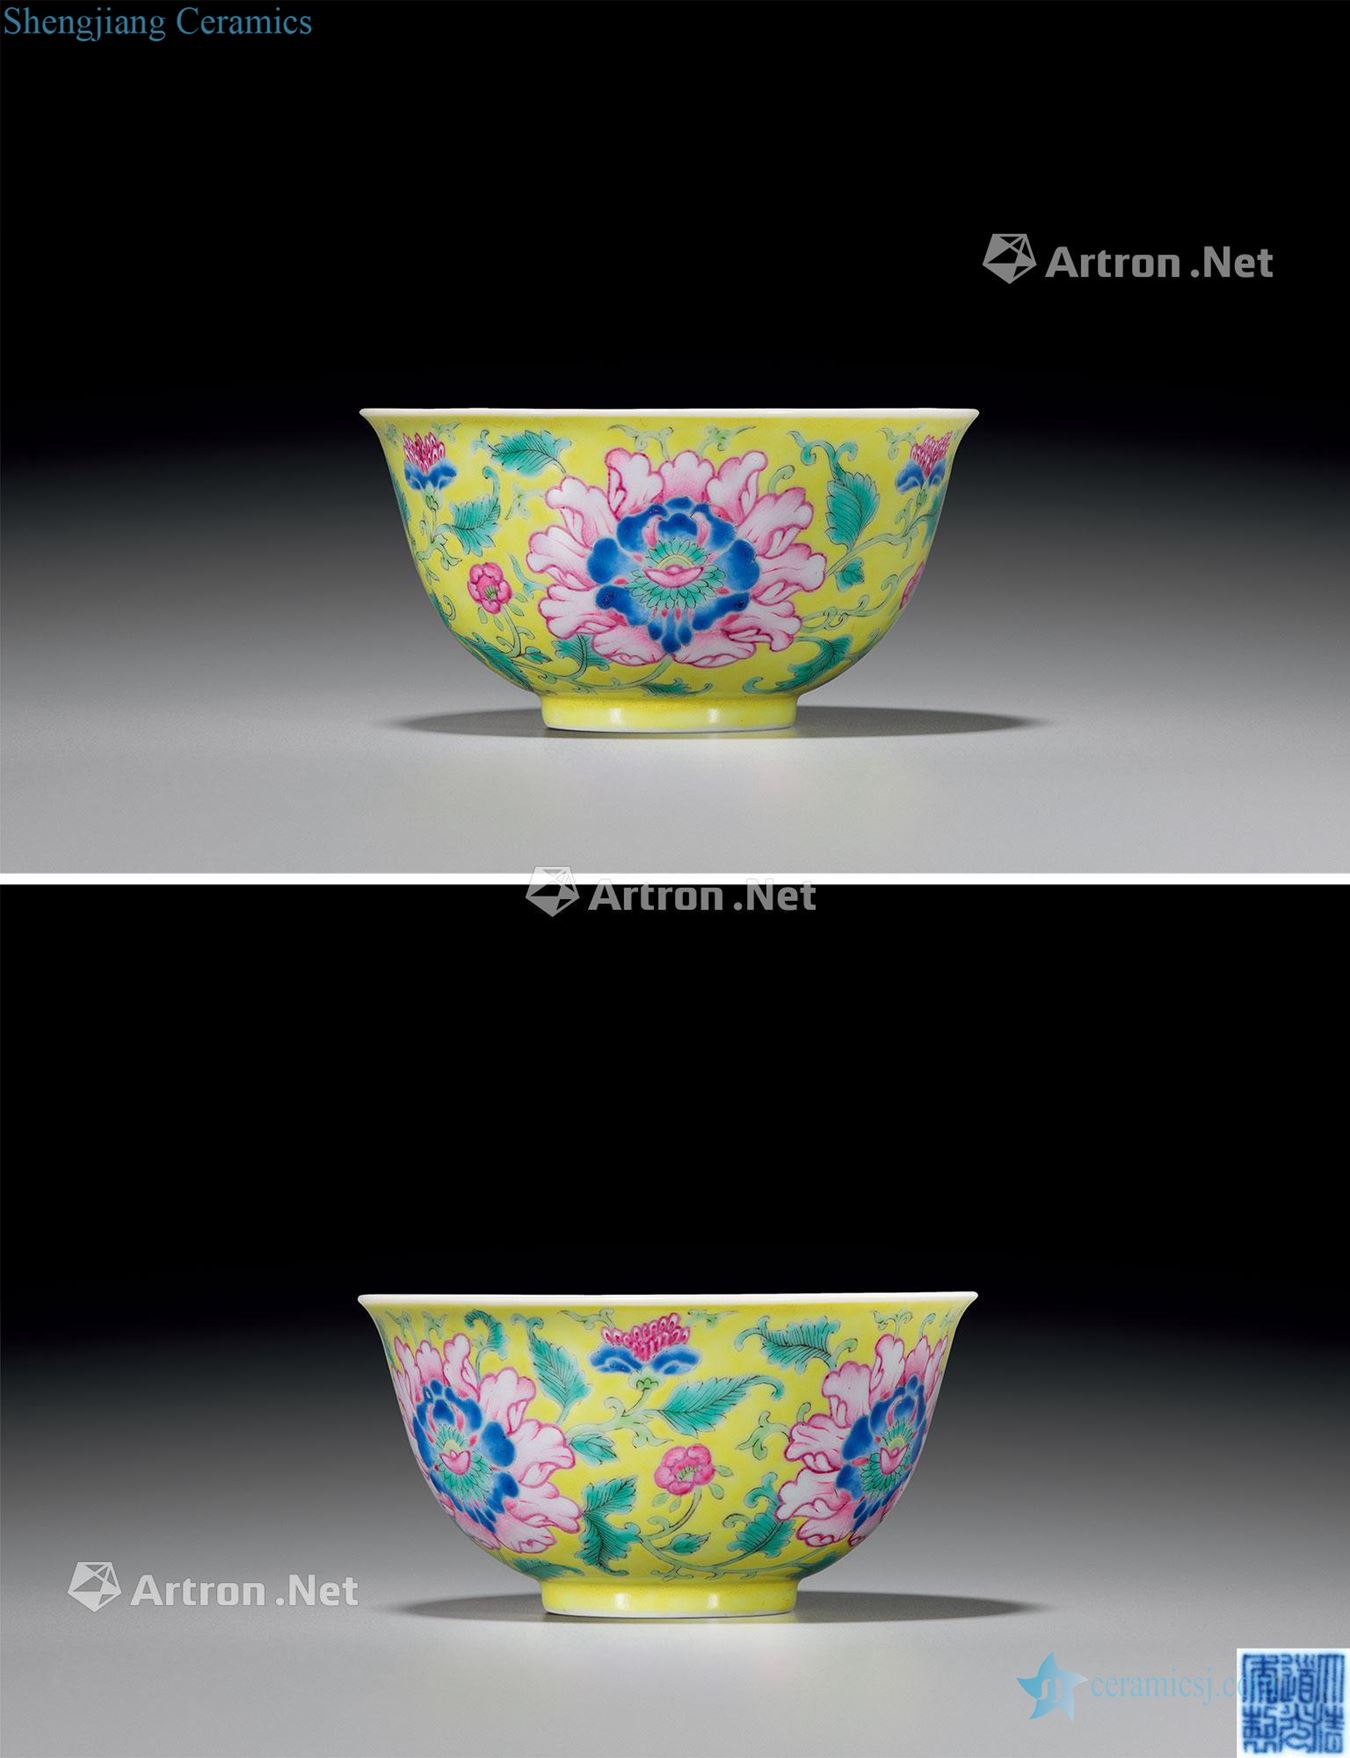 Qing daoguang To the yellow color peony green-splashed bowls